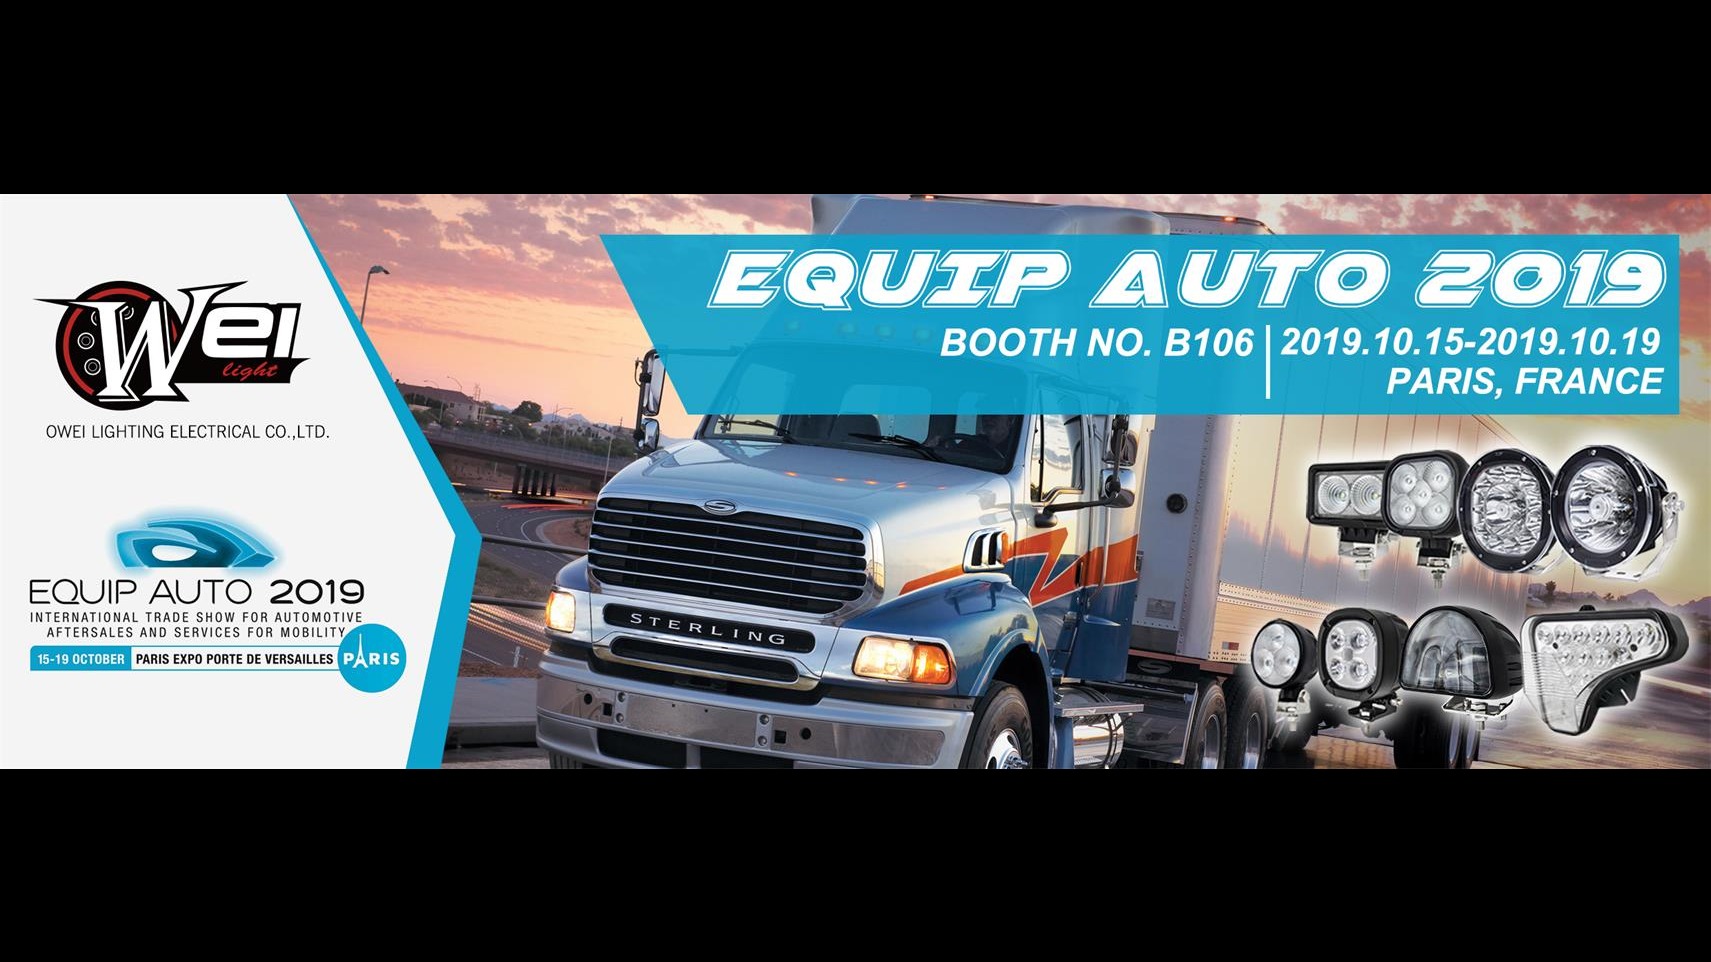 OWei Lighting attends EQUIP AUTO Exhibition from Oct.15 to 19 2019, Booth B106